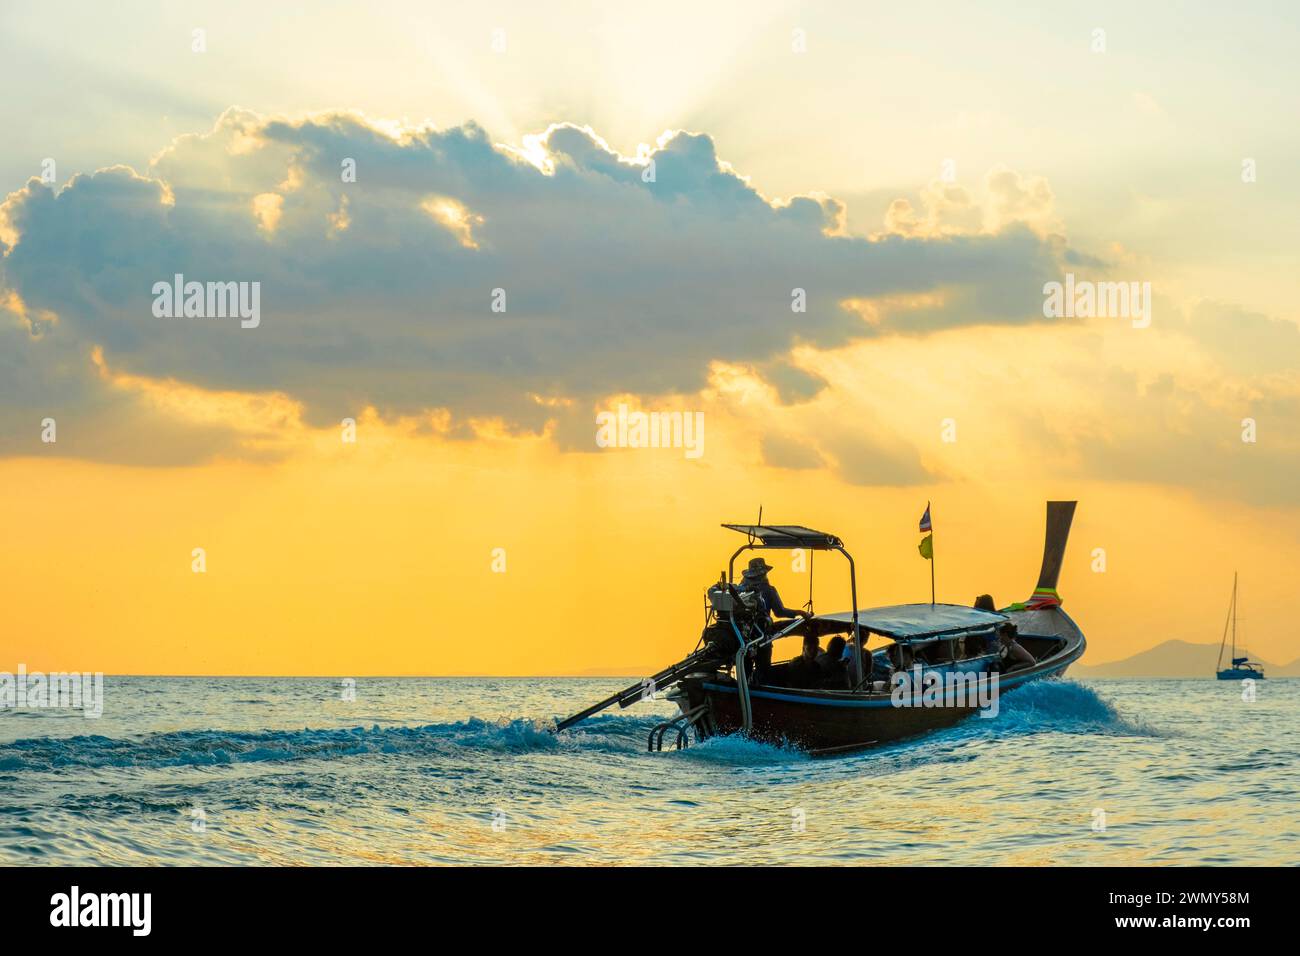 Thailand, Krabi province, West Railay, Long tail boat, long tail boat at sunset Stock Photo